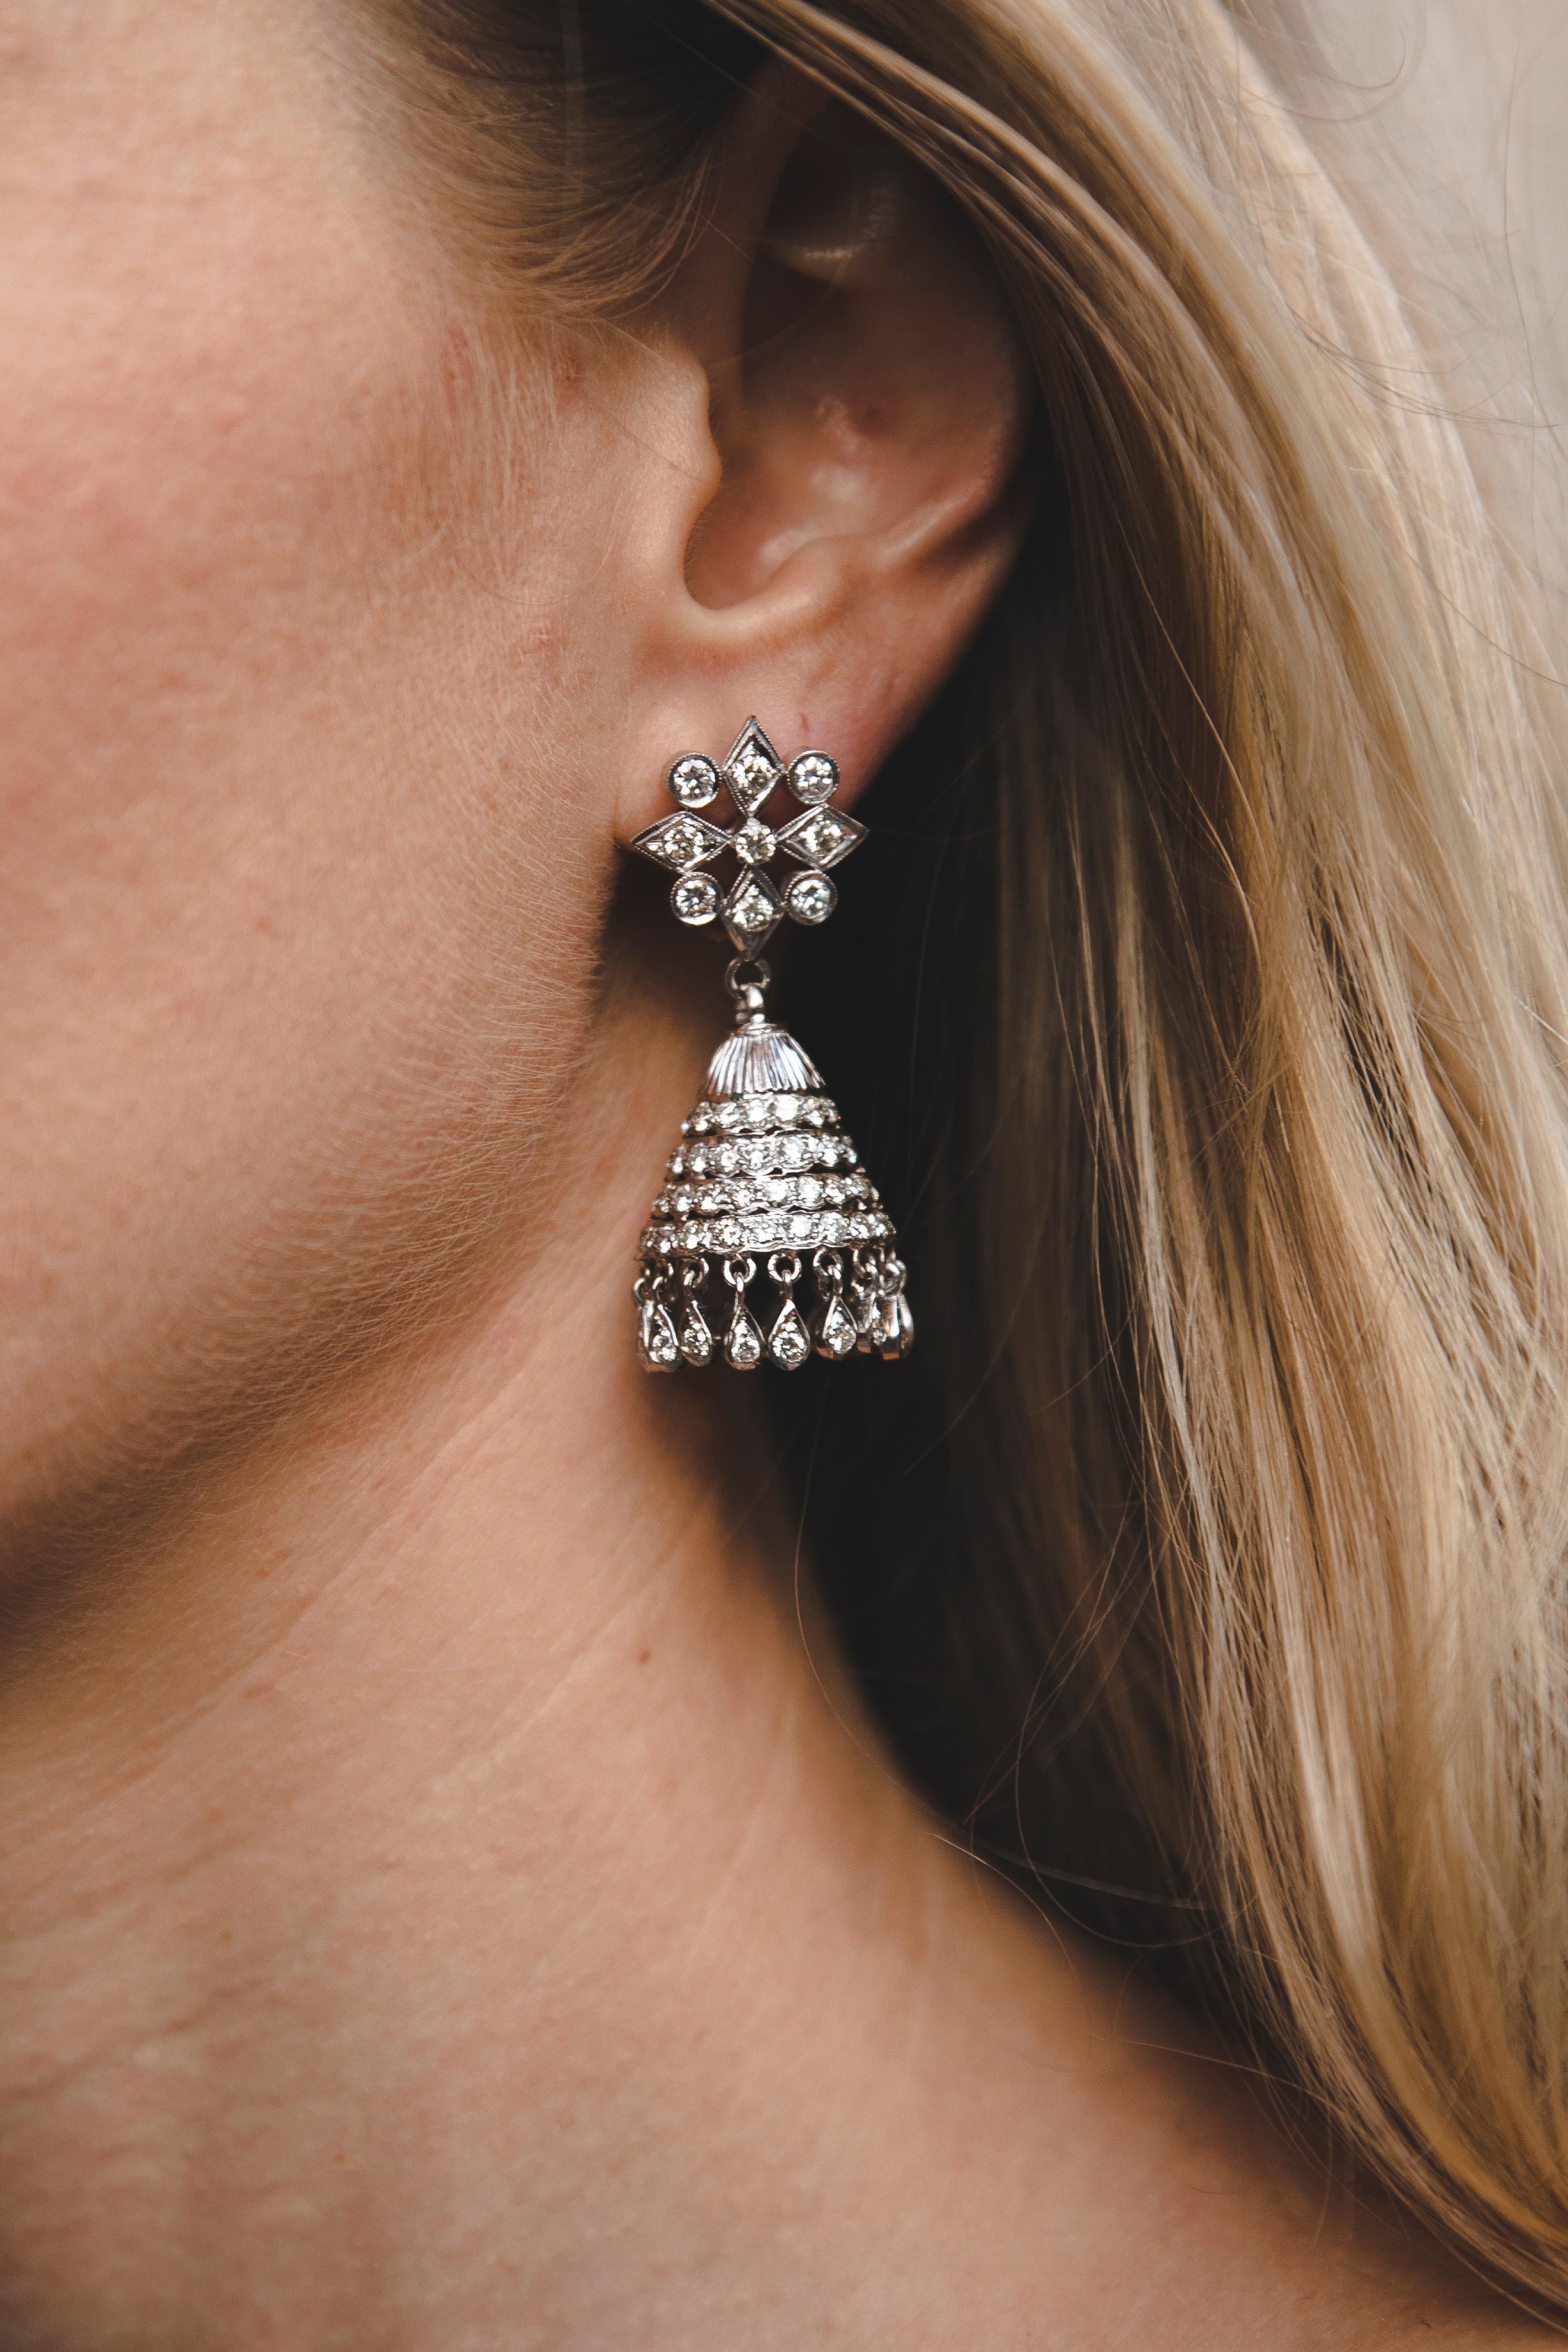 10 Carats Diamond Chandelier Earrings White Gold, 1970
Diamonds Chandelier Earrings with 10 Ct in more than 100 stones total. Fine earrings with exceptional work of jeweler, all moving parts create a lovely effect on the ear. Using so many Diamonds